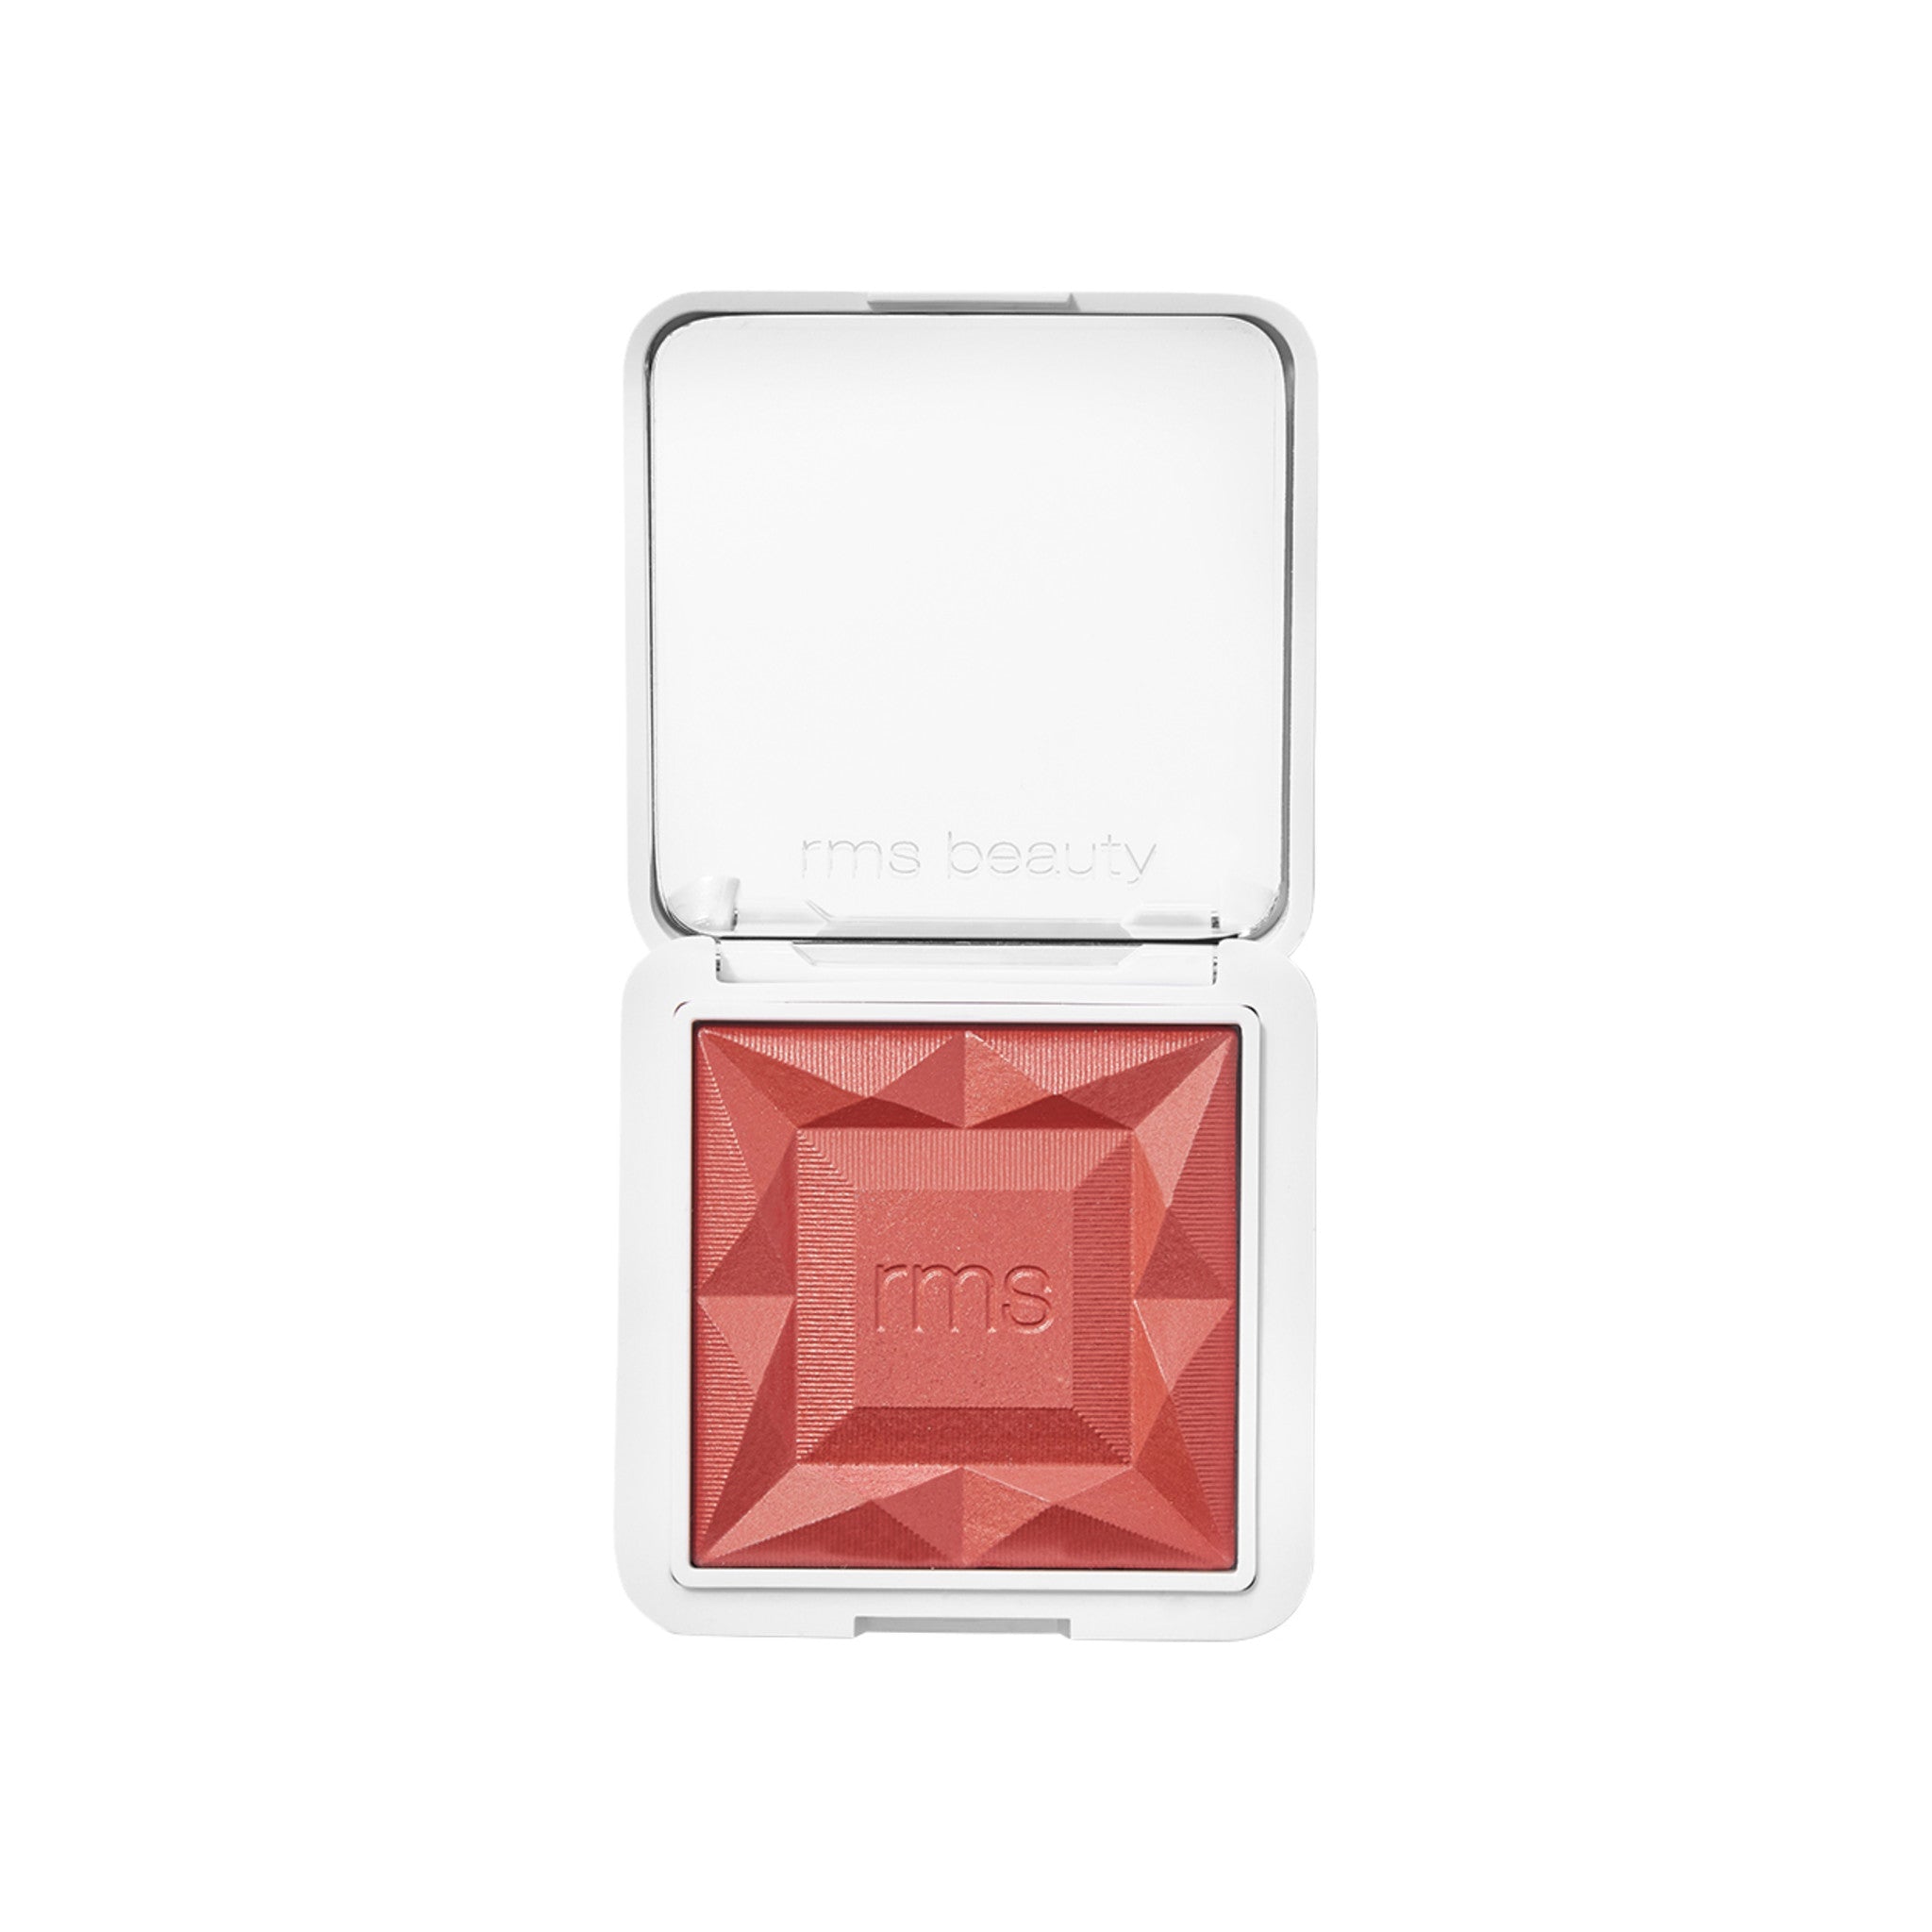 RMS Beauty ReDimension Hydra Powder Blush Color/Shade variant: Sangria main image. This product is in the color pink